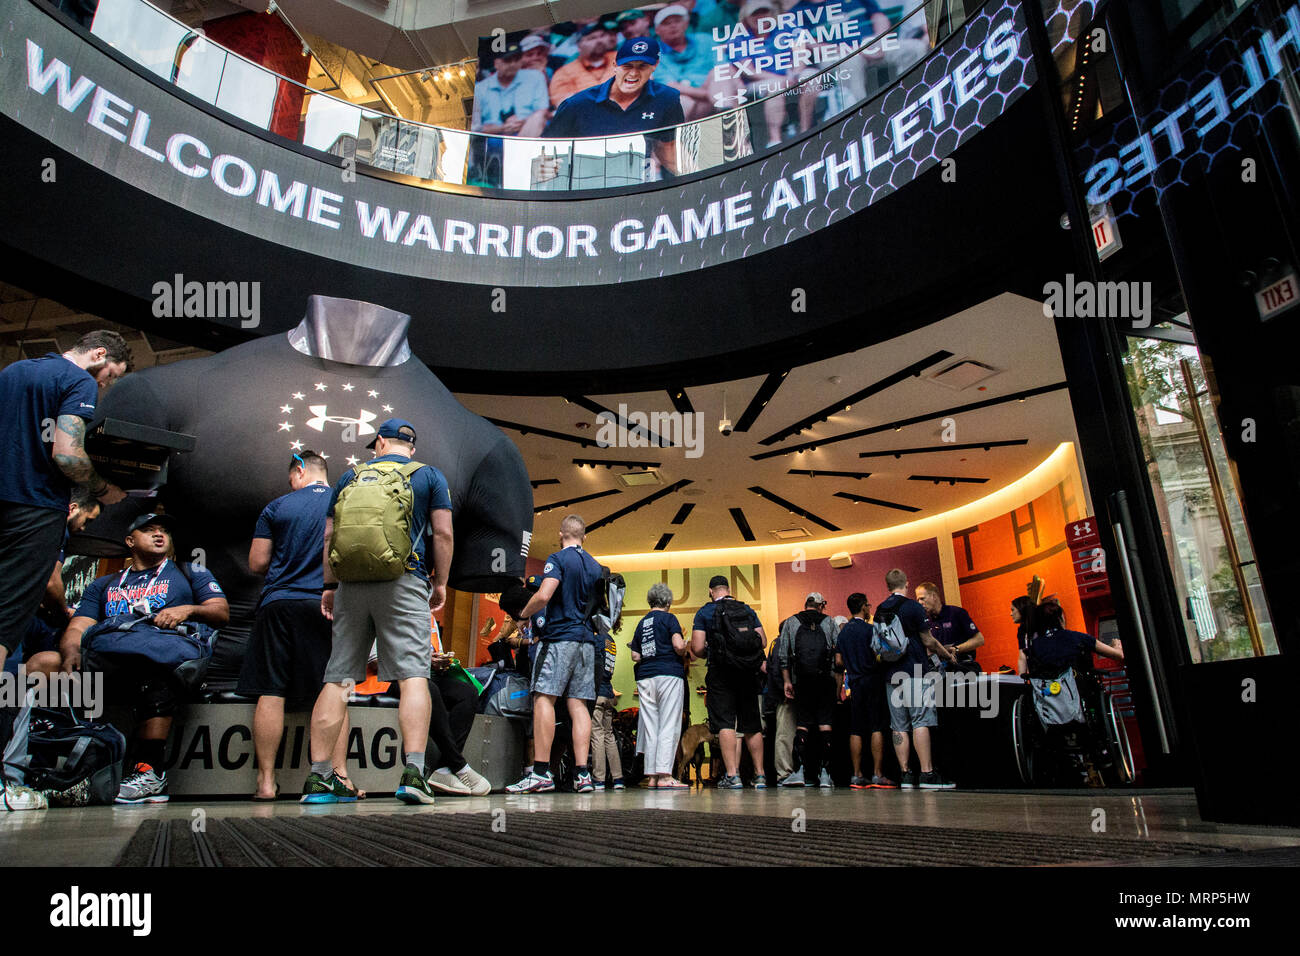 Funeral Snack Agriculture CHICAGO (June 29, 2017) Team Navy register for the 2017 DoD Warrior Games  at Under Armour Brand House in Chicago. The DoD Warrior Games are an annual  event allowing wounded, ill and